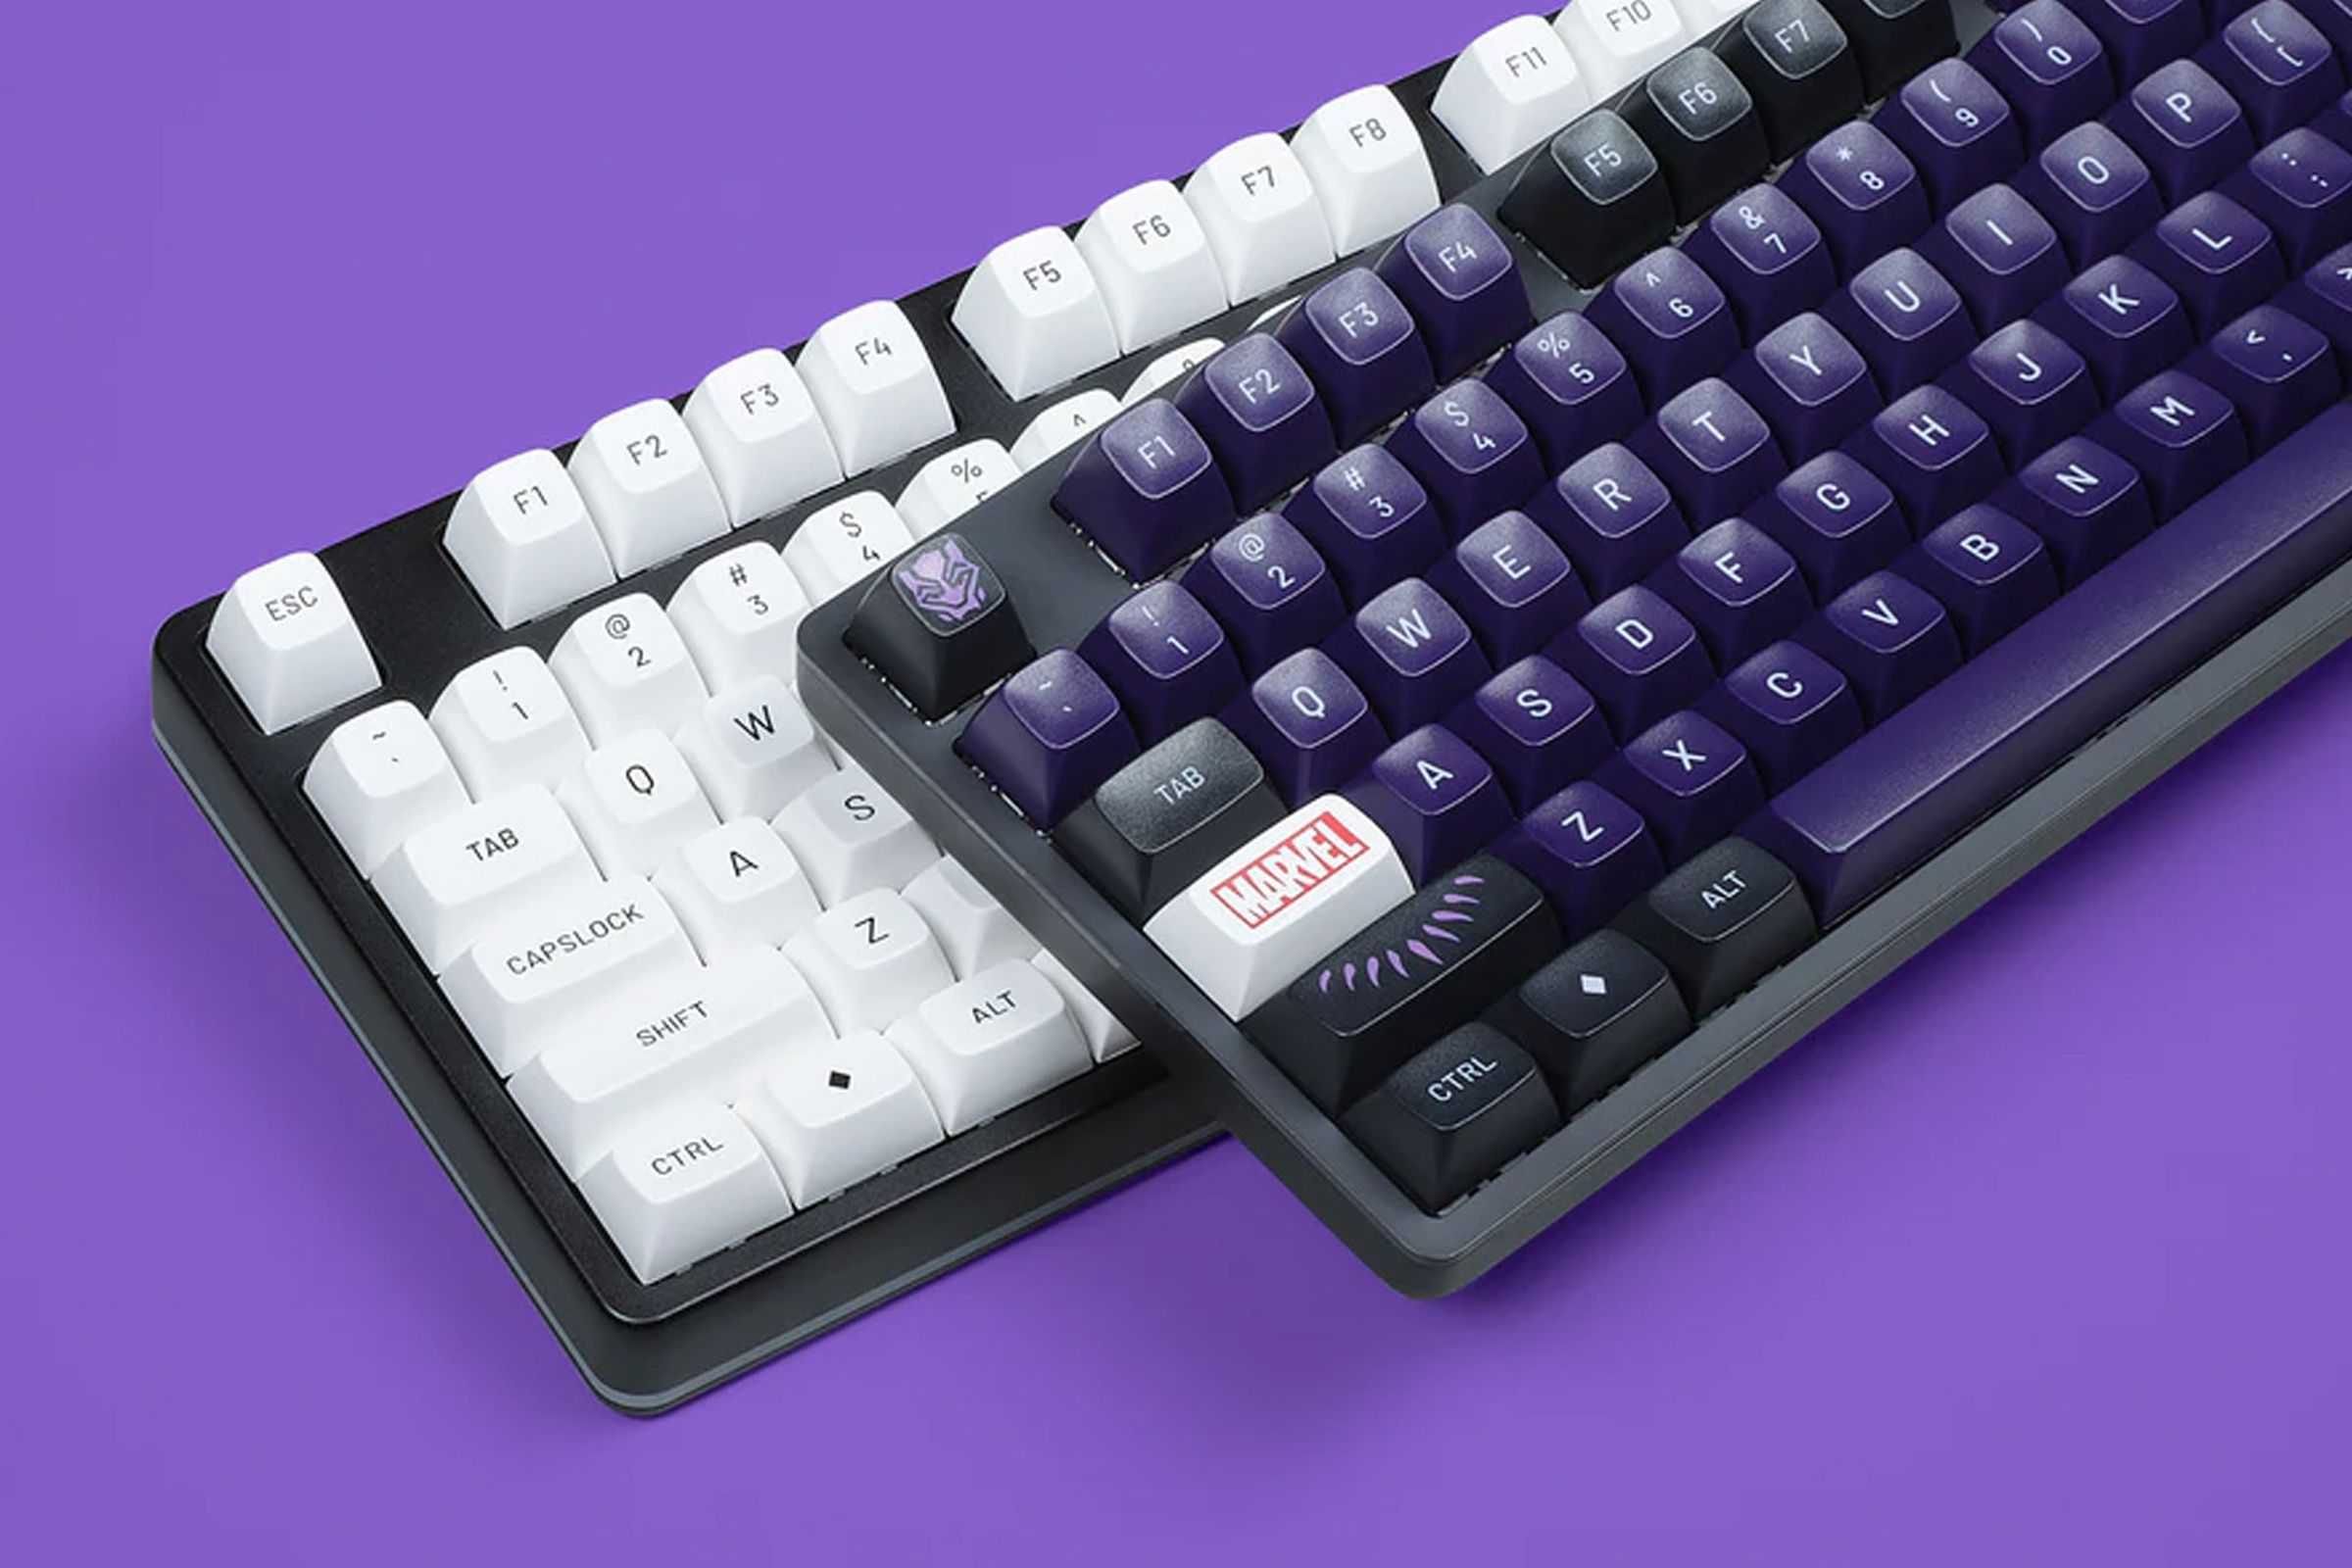 Drop’s selection of keycaps range from clean aesthetics to cringey Marvel collaborations.